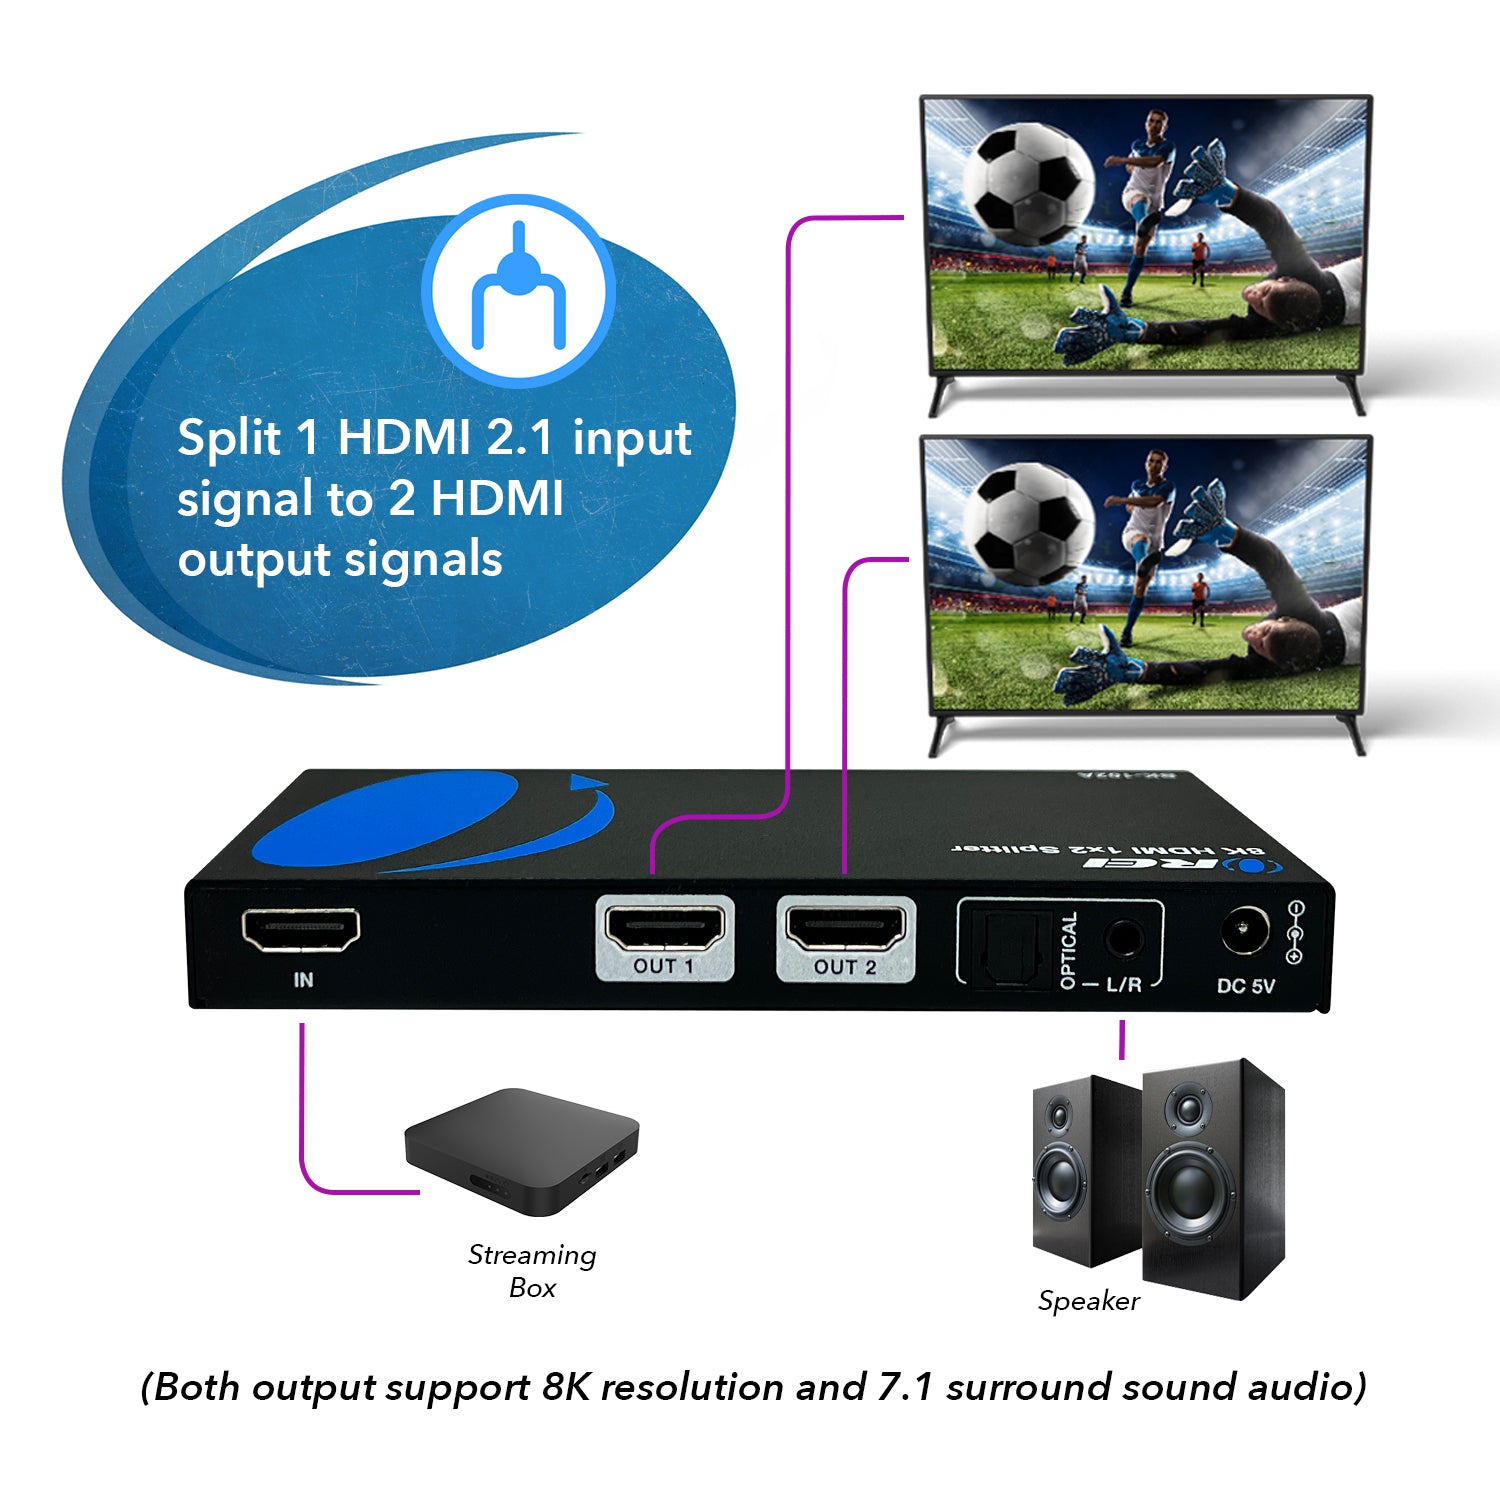 REVALS TV-out Cable 1x2 HDMI Splitter 2 Ports, HDMI Splitter 1 in